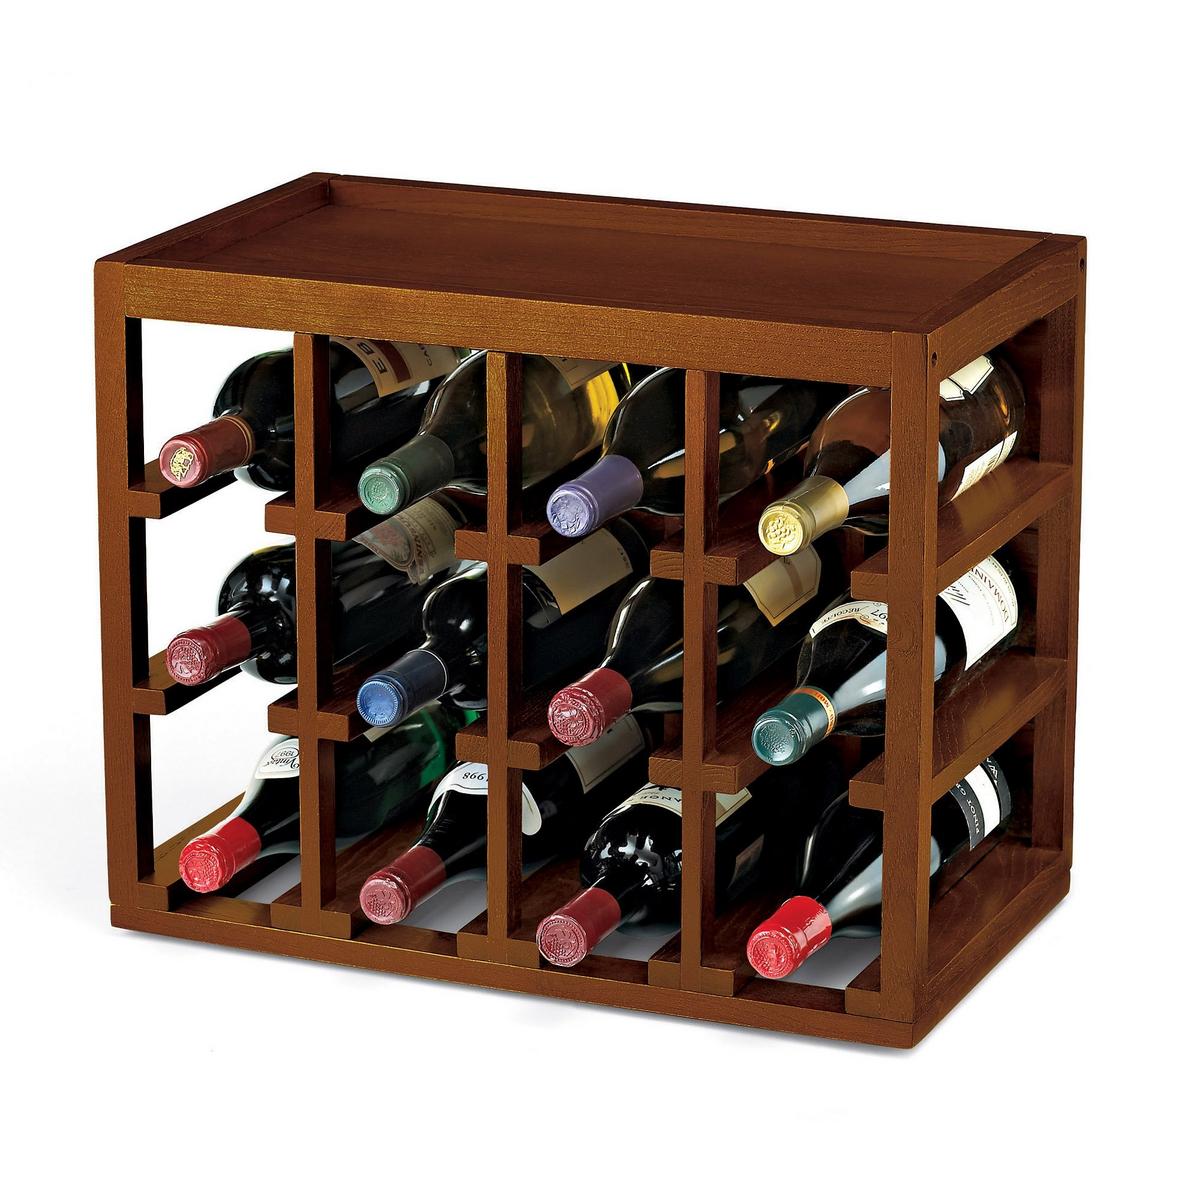 Wine Rack made from high-quality strong, weighty hardwood has cube shape with 12 grid fit securely one on top of the other for space-saving